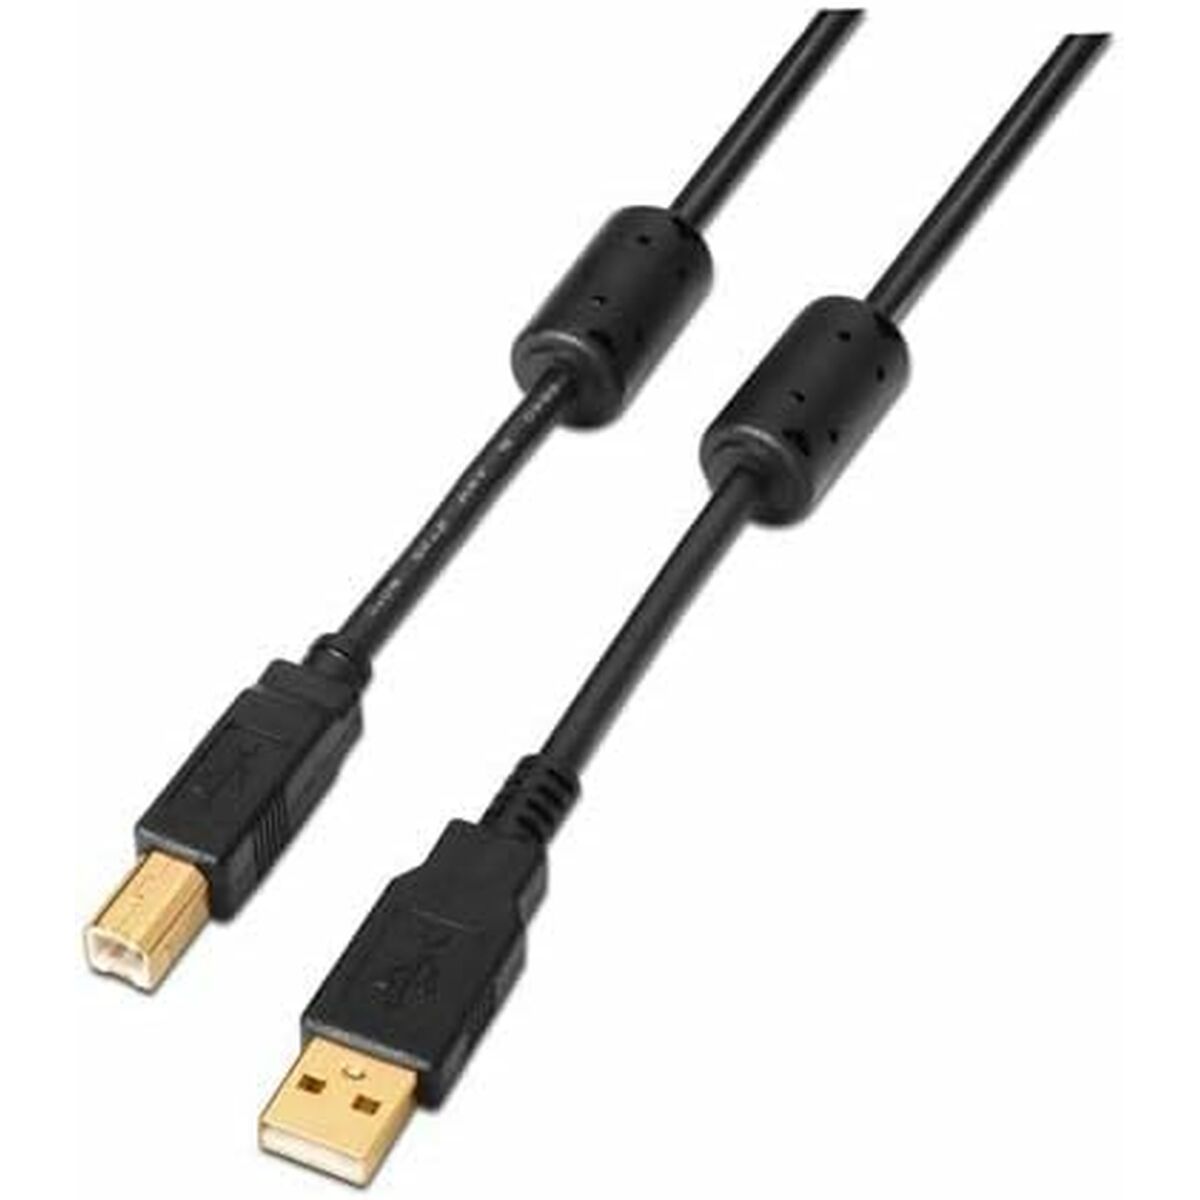 USB 2.0 A to USB B Cable NANOCABLE 10.01.1202 Black 2 m